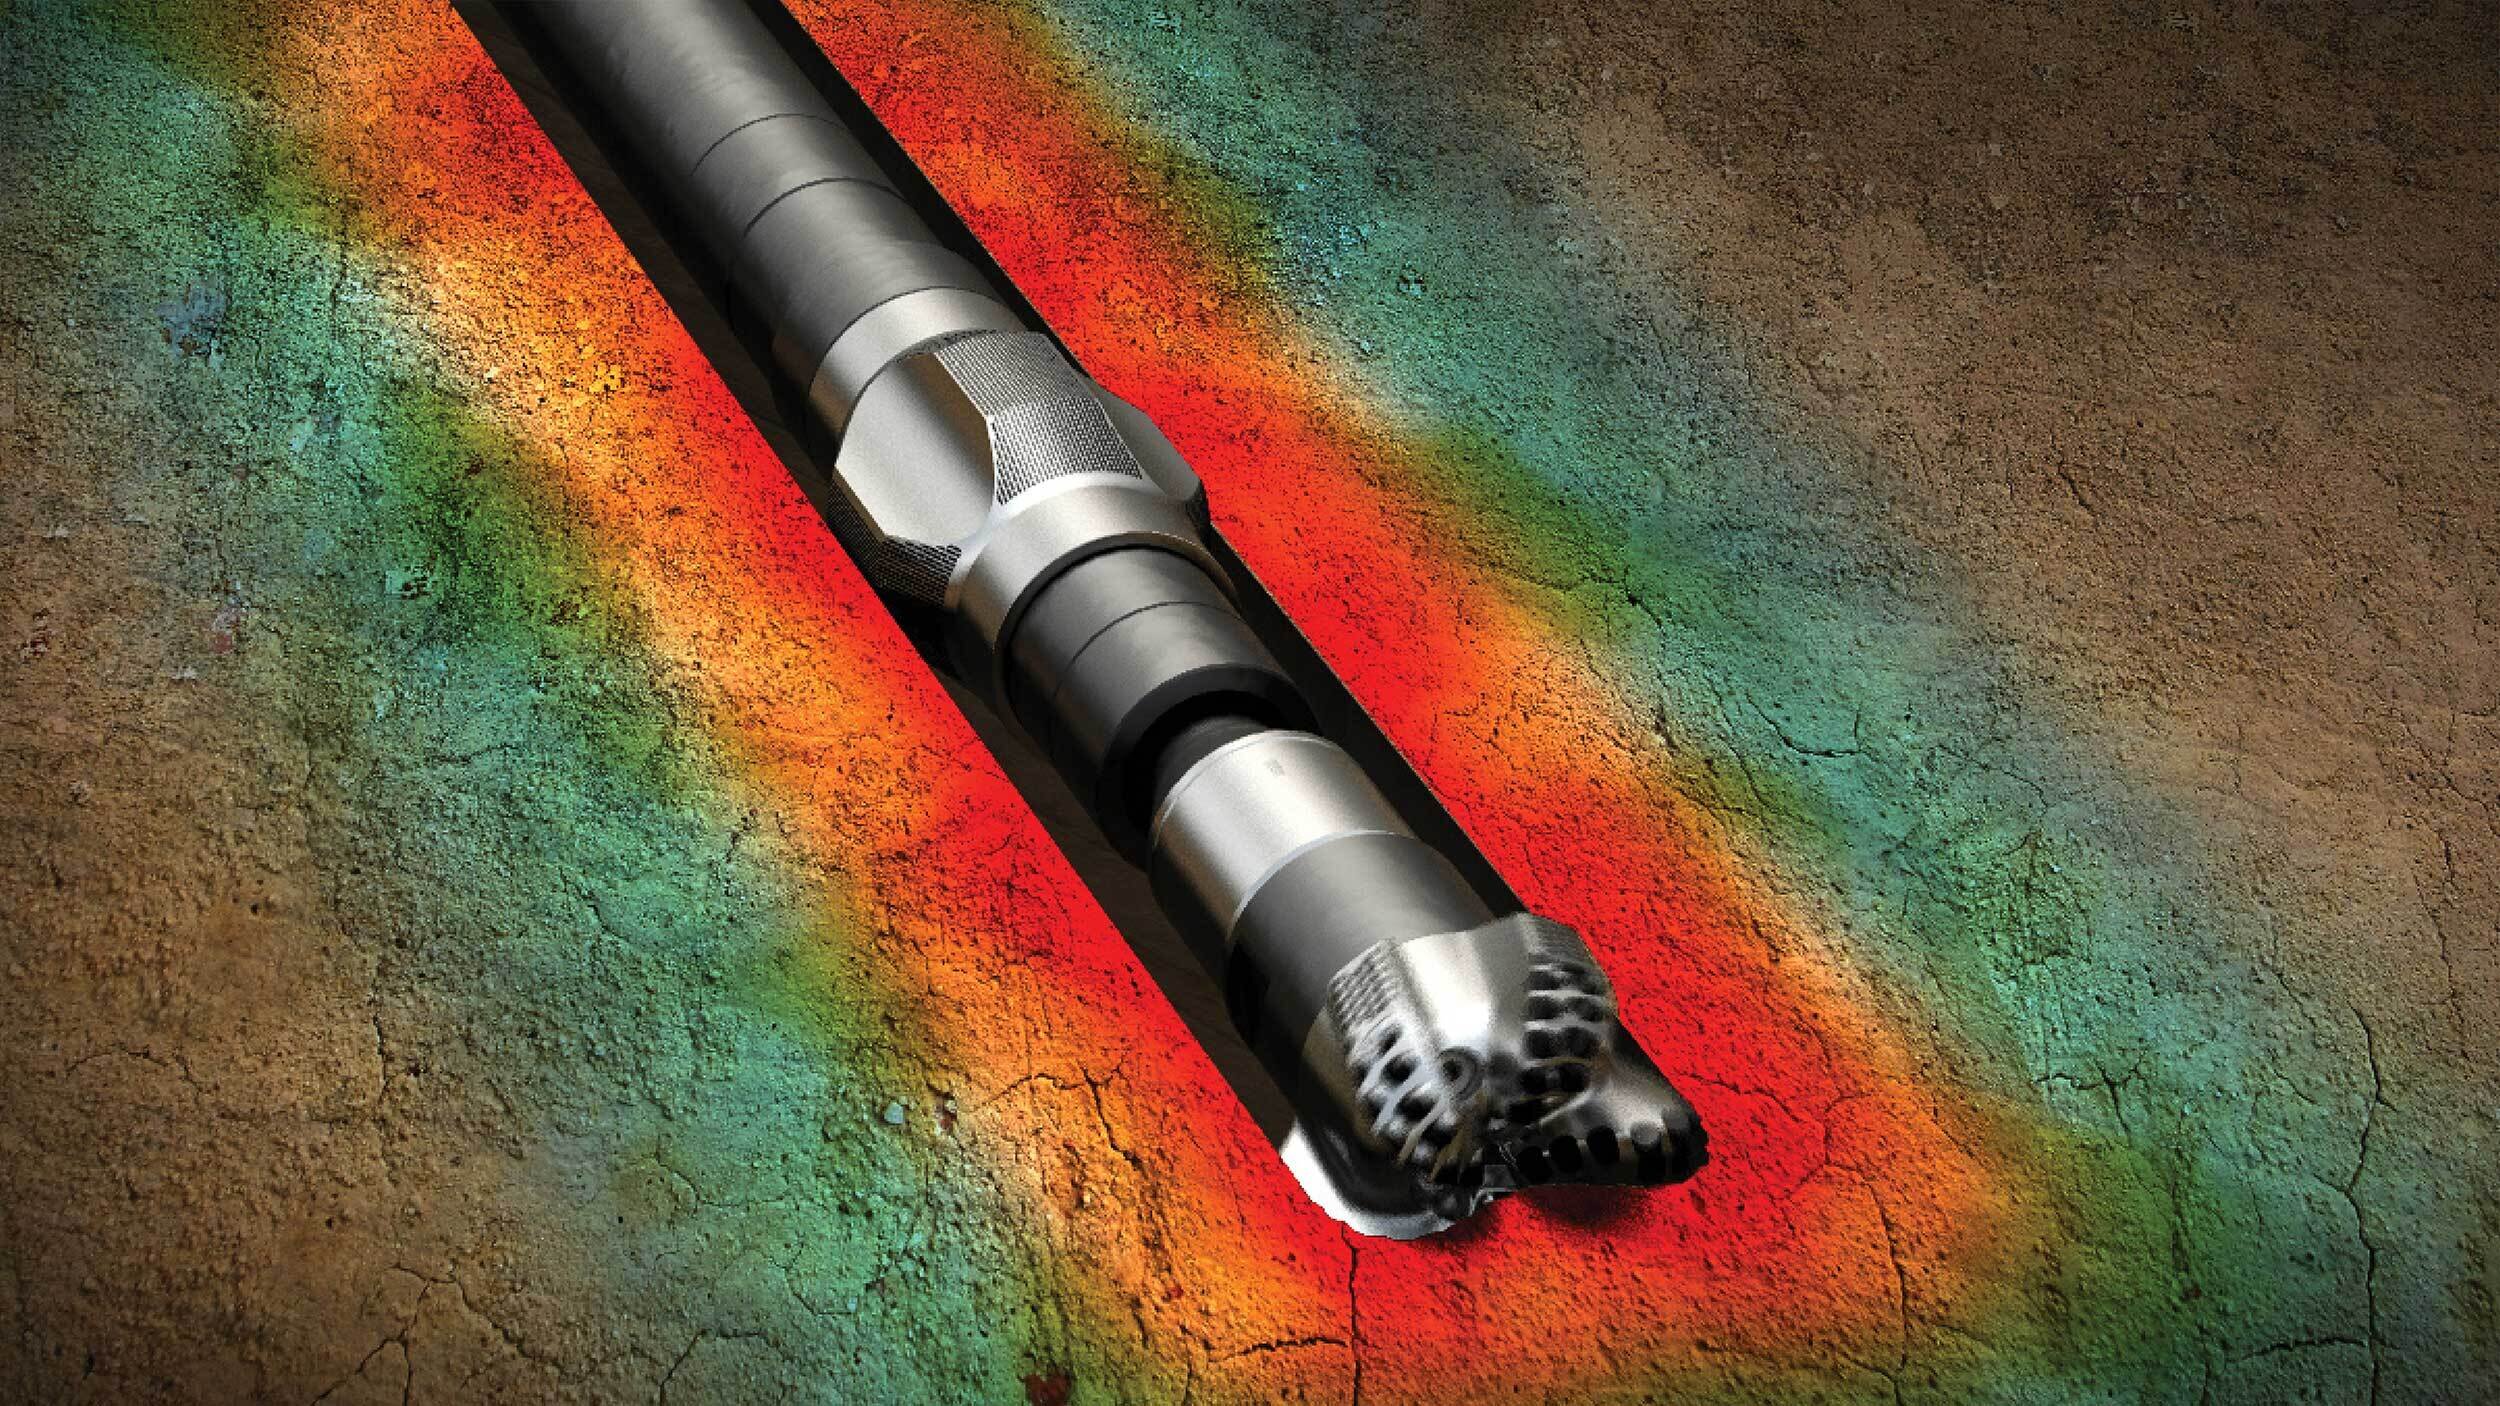 Advanced fluids systems ensure efficient, accurate drilling